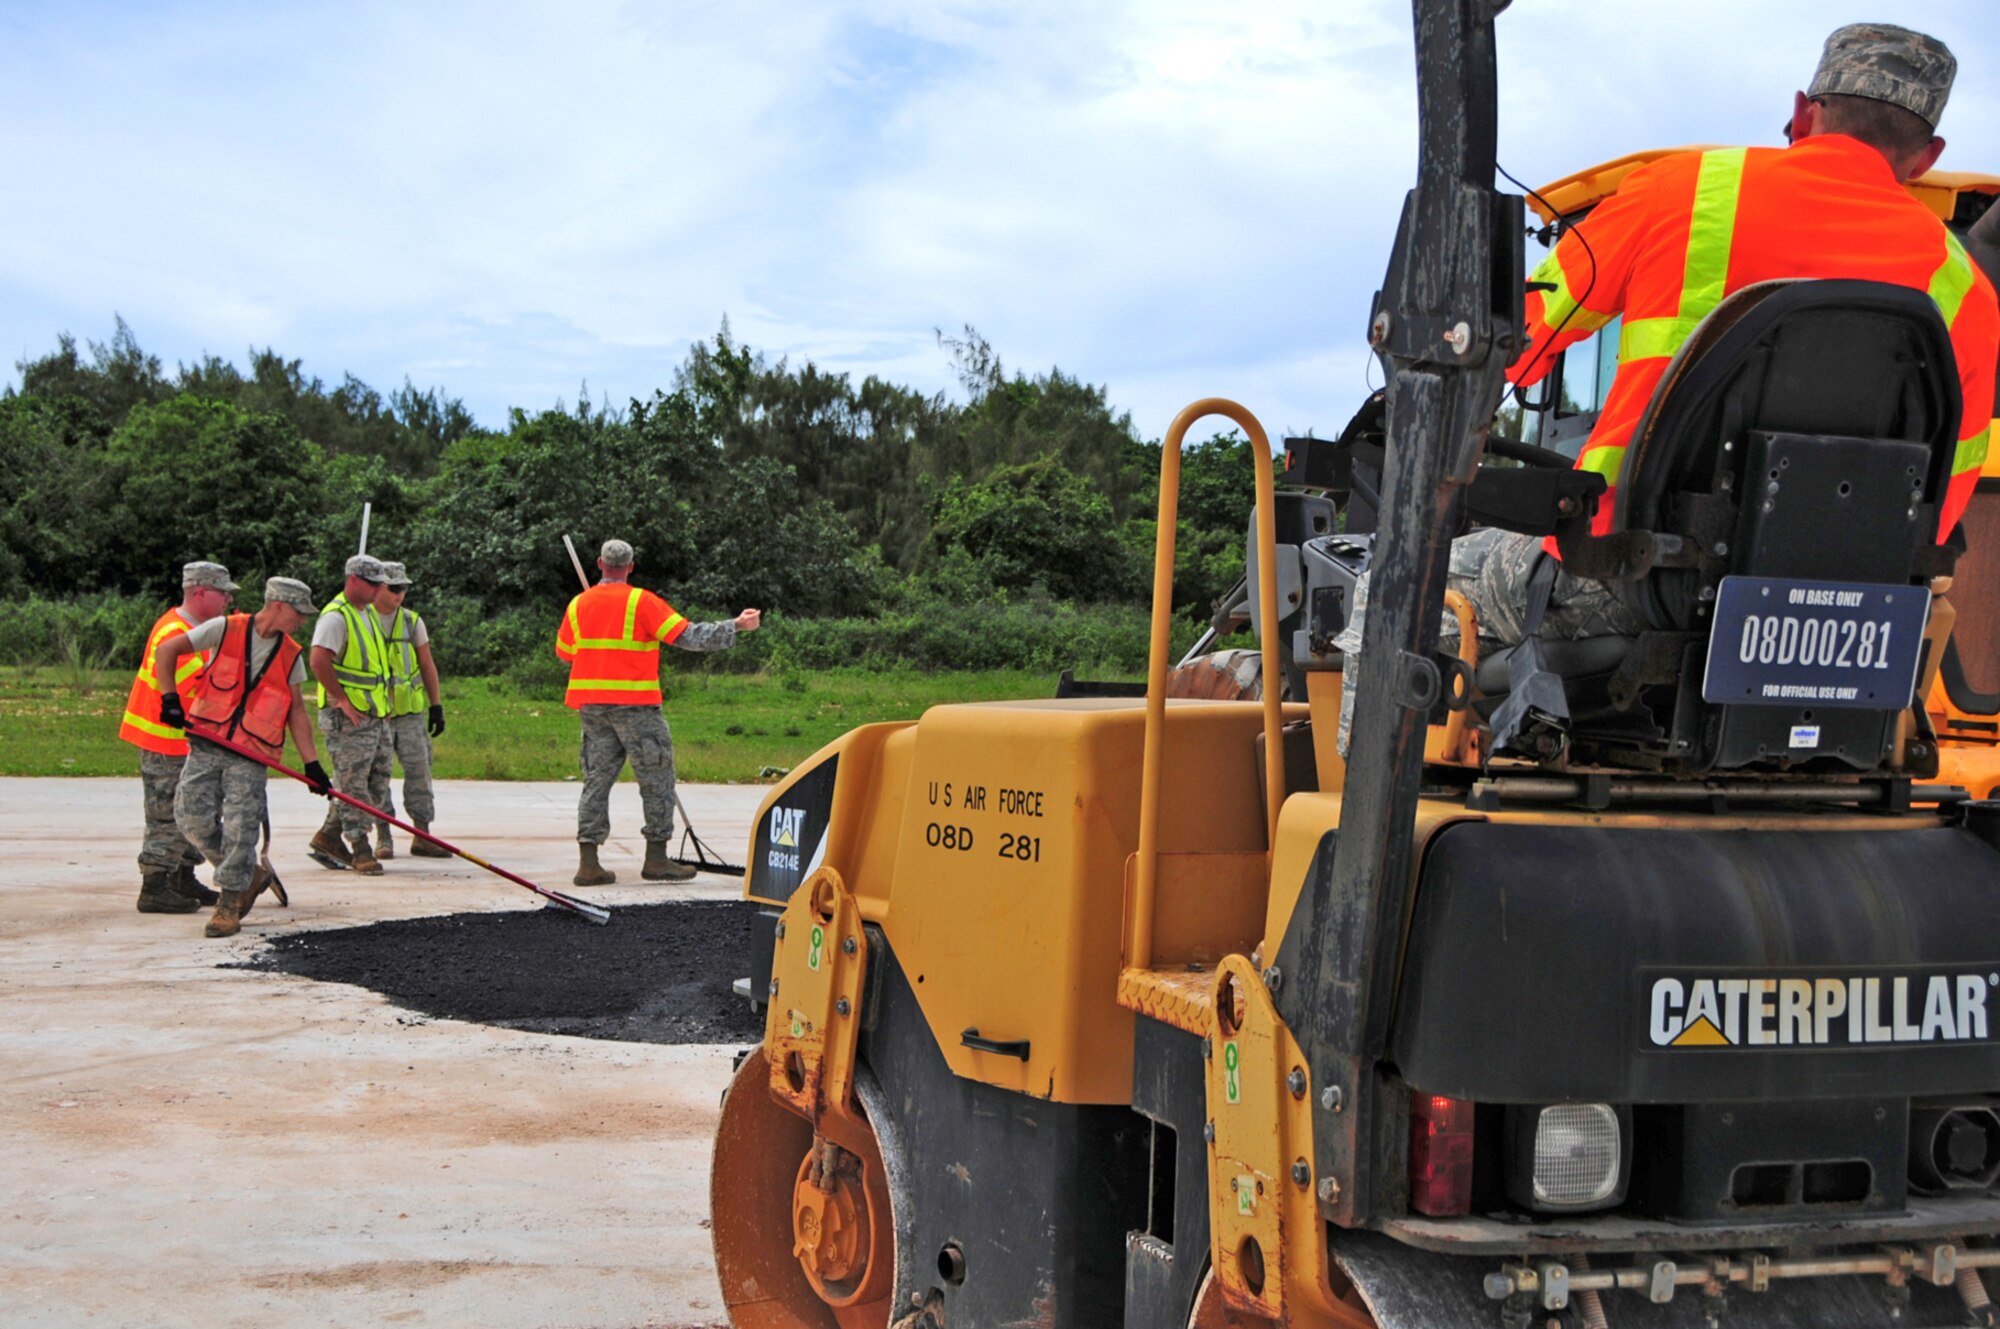 ANDERSEN AIR FORCE BASE, Guam – The 36th Civil Engineer Squadron airfield damage repair team finishes up by leveling the new material with the rest of the airfield during training at Northwest Field here, Aug. 30. The Airmen simulated a missile crater at the new airfield damage repair pad in order to train on one of their core contingency competencies. (U.S. Air Force photo by Airman 1st Class Marianique Santos/Released)